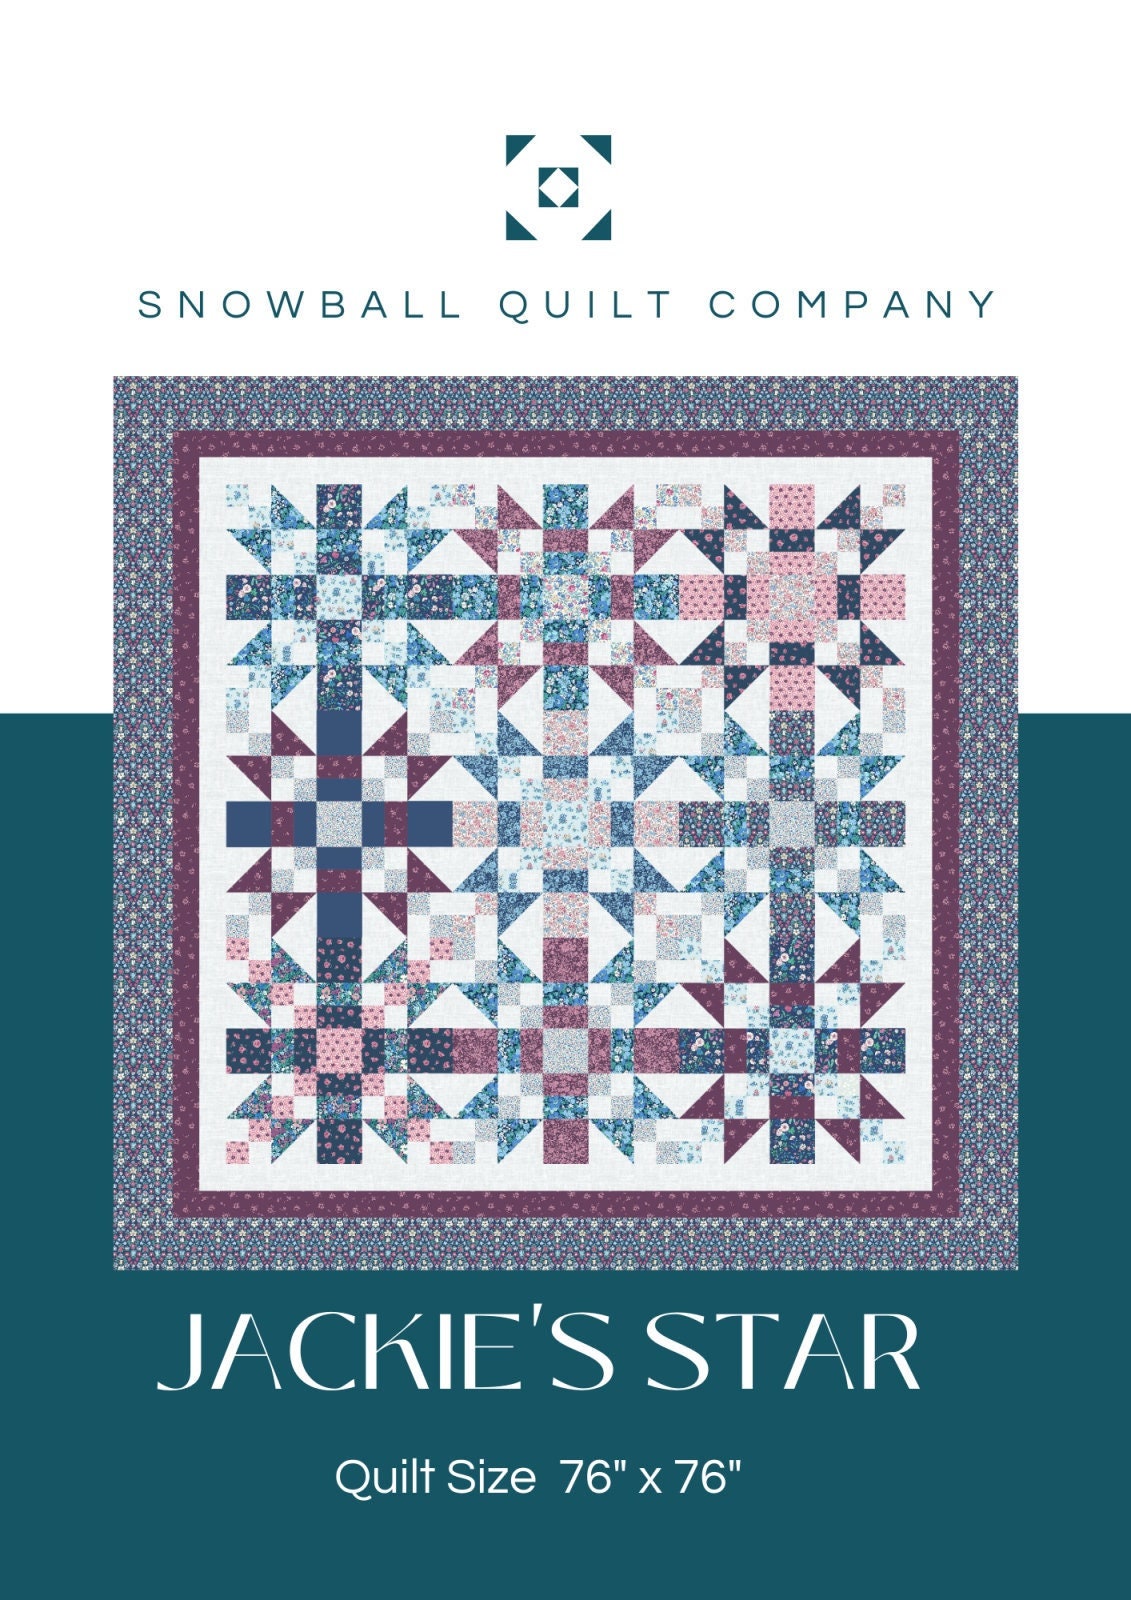 Snowball Squared Quilt Pattern by Missouri Star